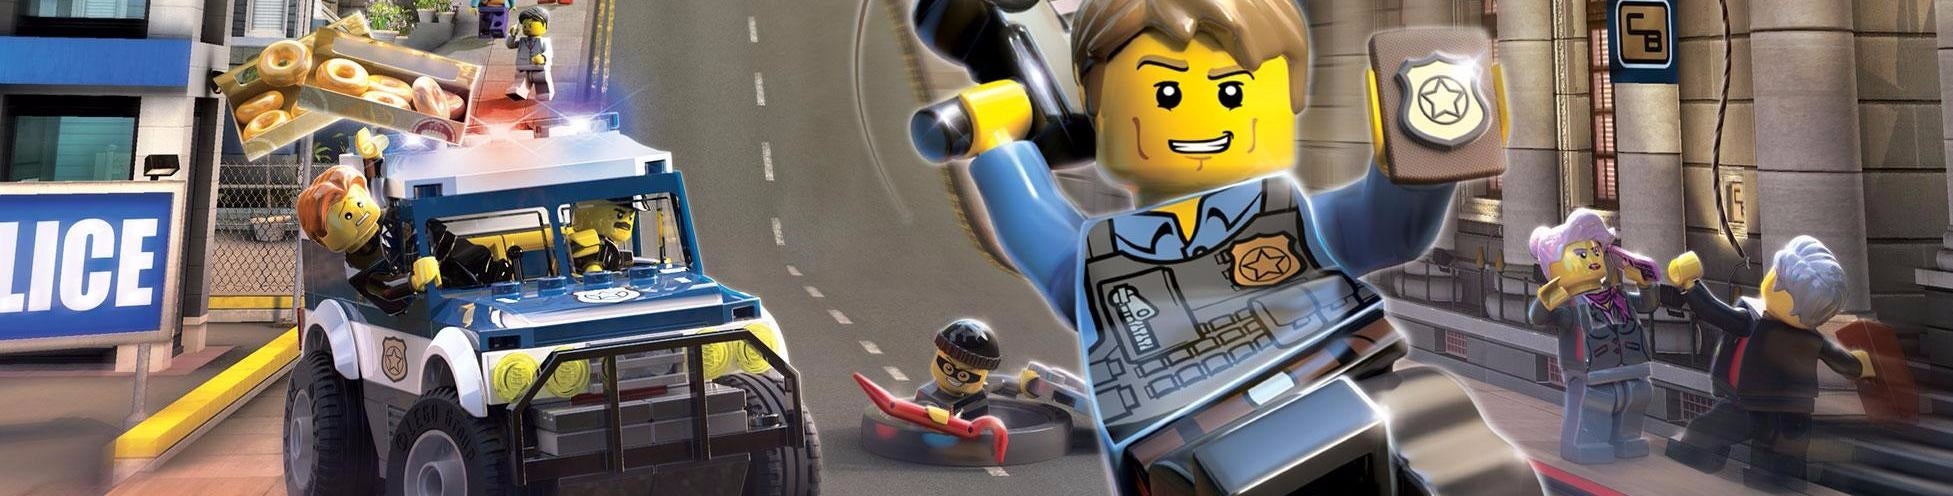 Image for Lego City Undercover on Switch holds up well against PS4